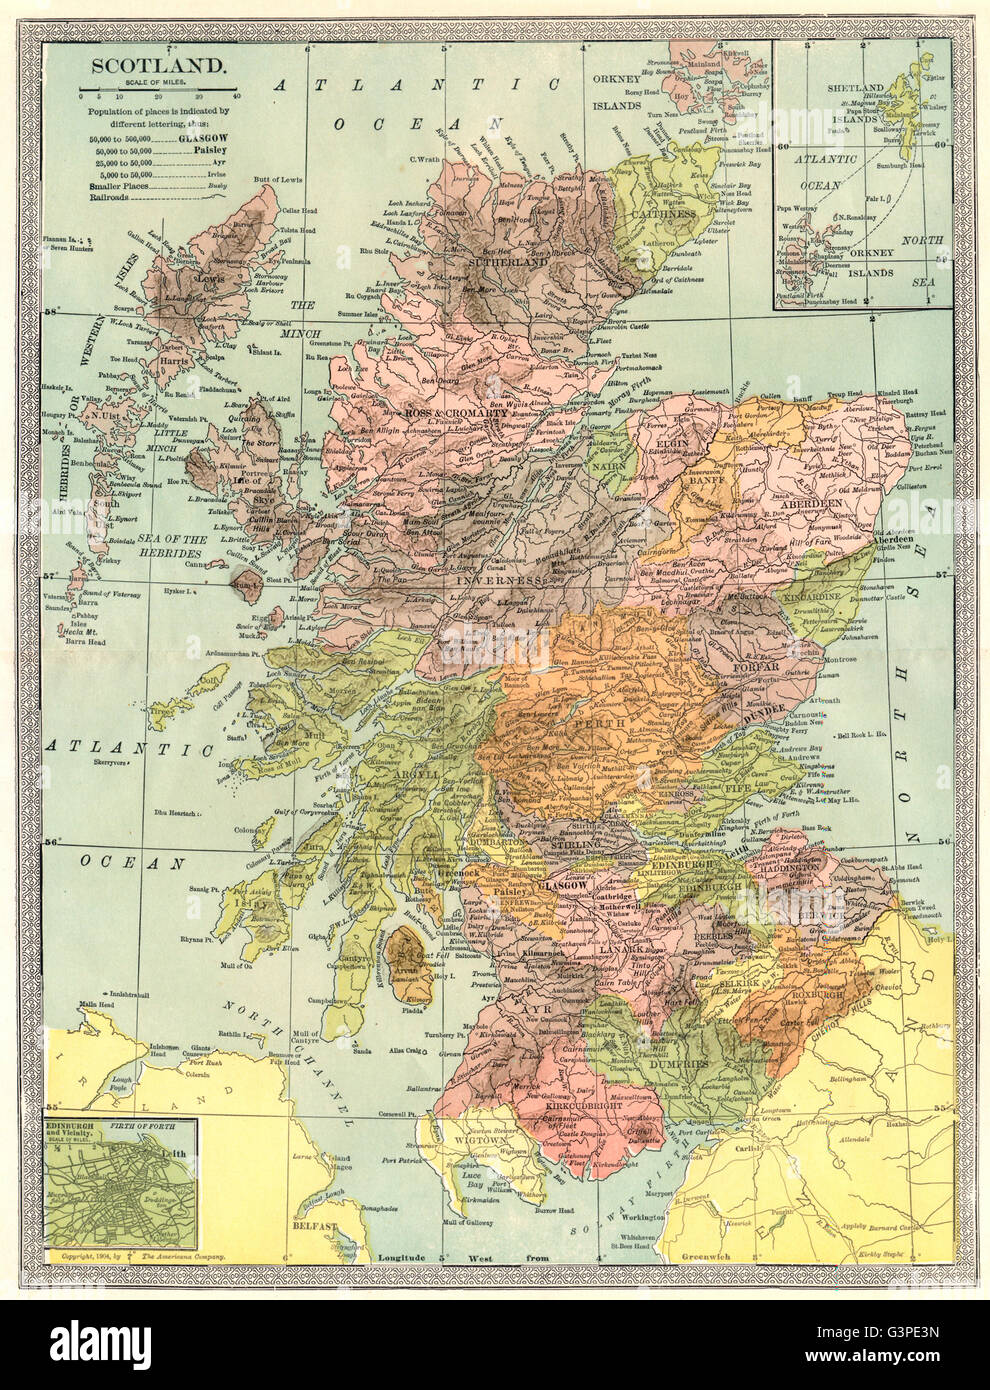 SCOTLAND showing counties, 1907 antique map Stock Photo